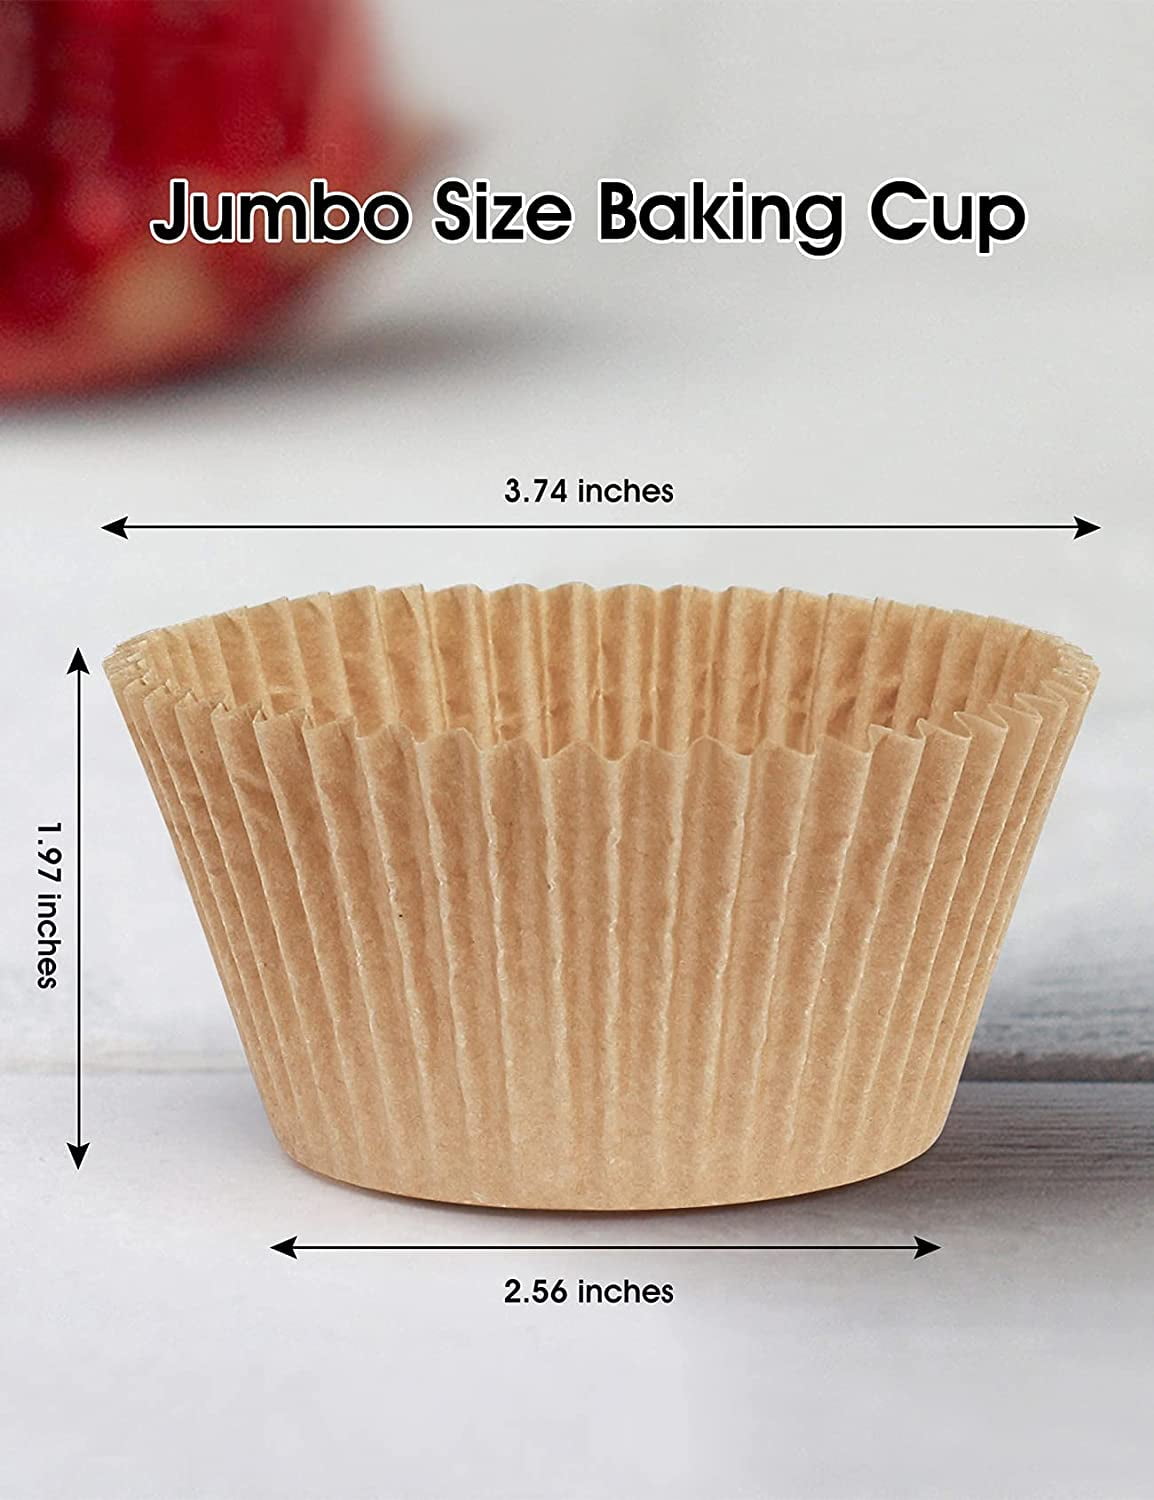 Gifbera Odorless Muffin Baking Cups Cupcake Wrappers for Wedding Birthday Celebration Occasion Jumbo White Cupcake Liners Greaseproof Paper 200-Count 